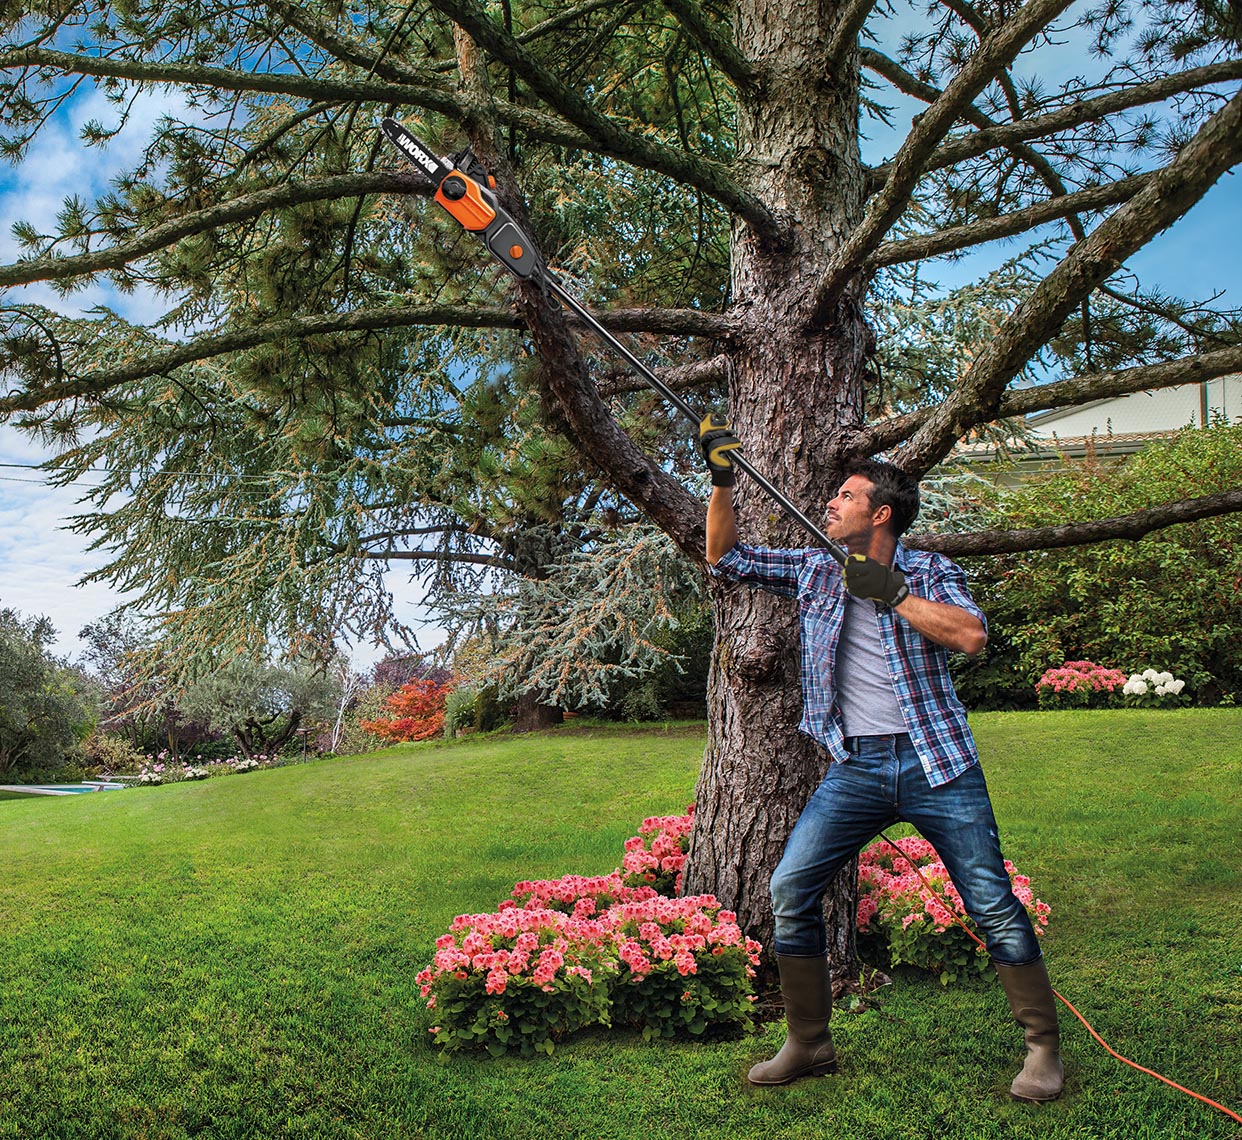 WORX 10 in., 8A Electric Pole Saw reaches up to 10 feet, making tree trimming easier and safer.